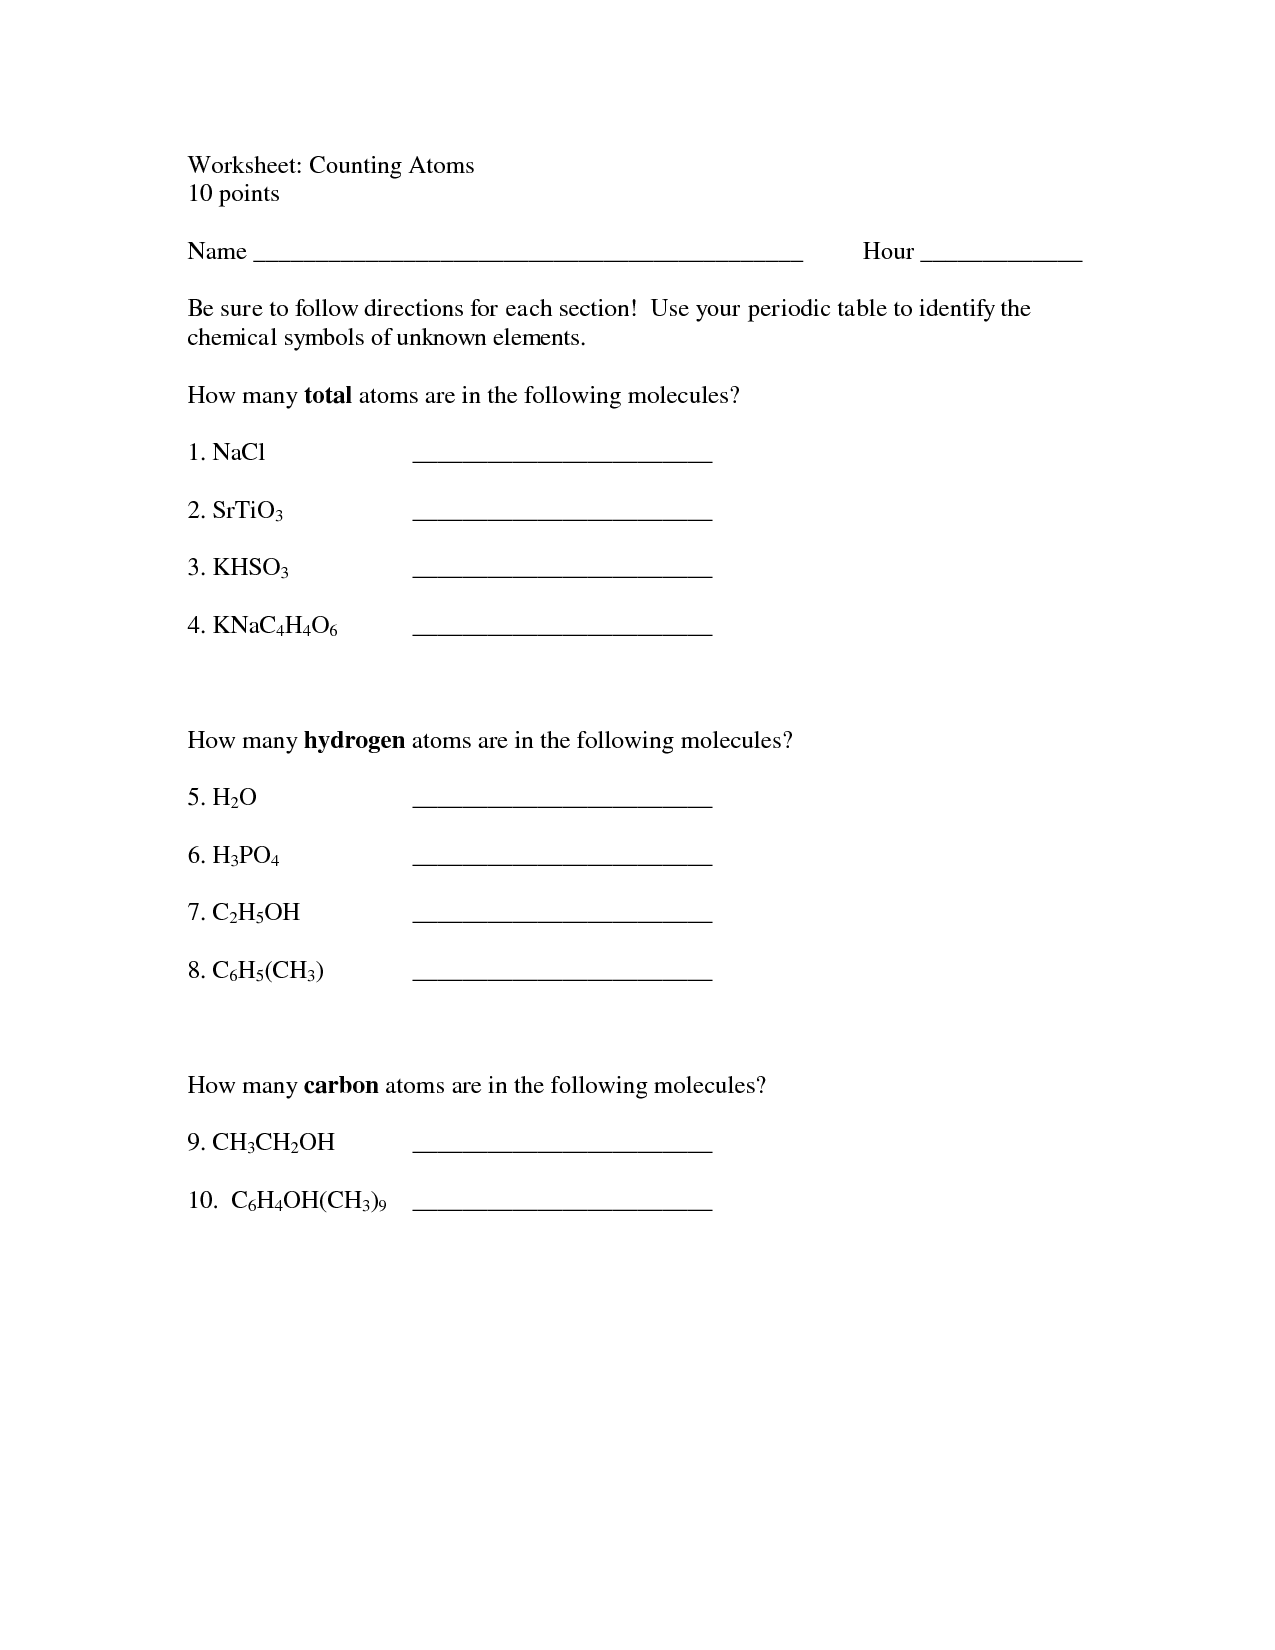 Counting Atoms and Molecules Worksheet